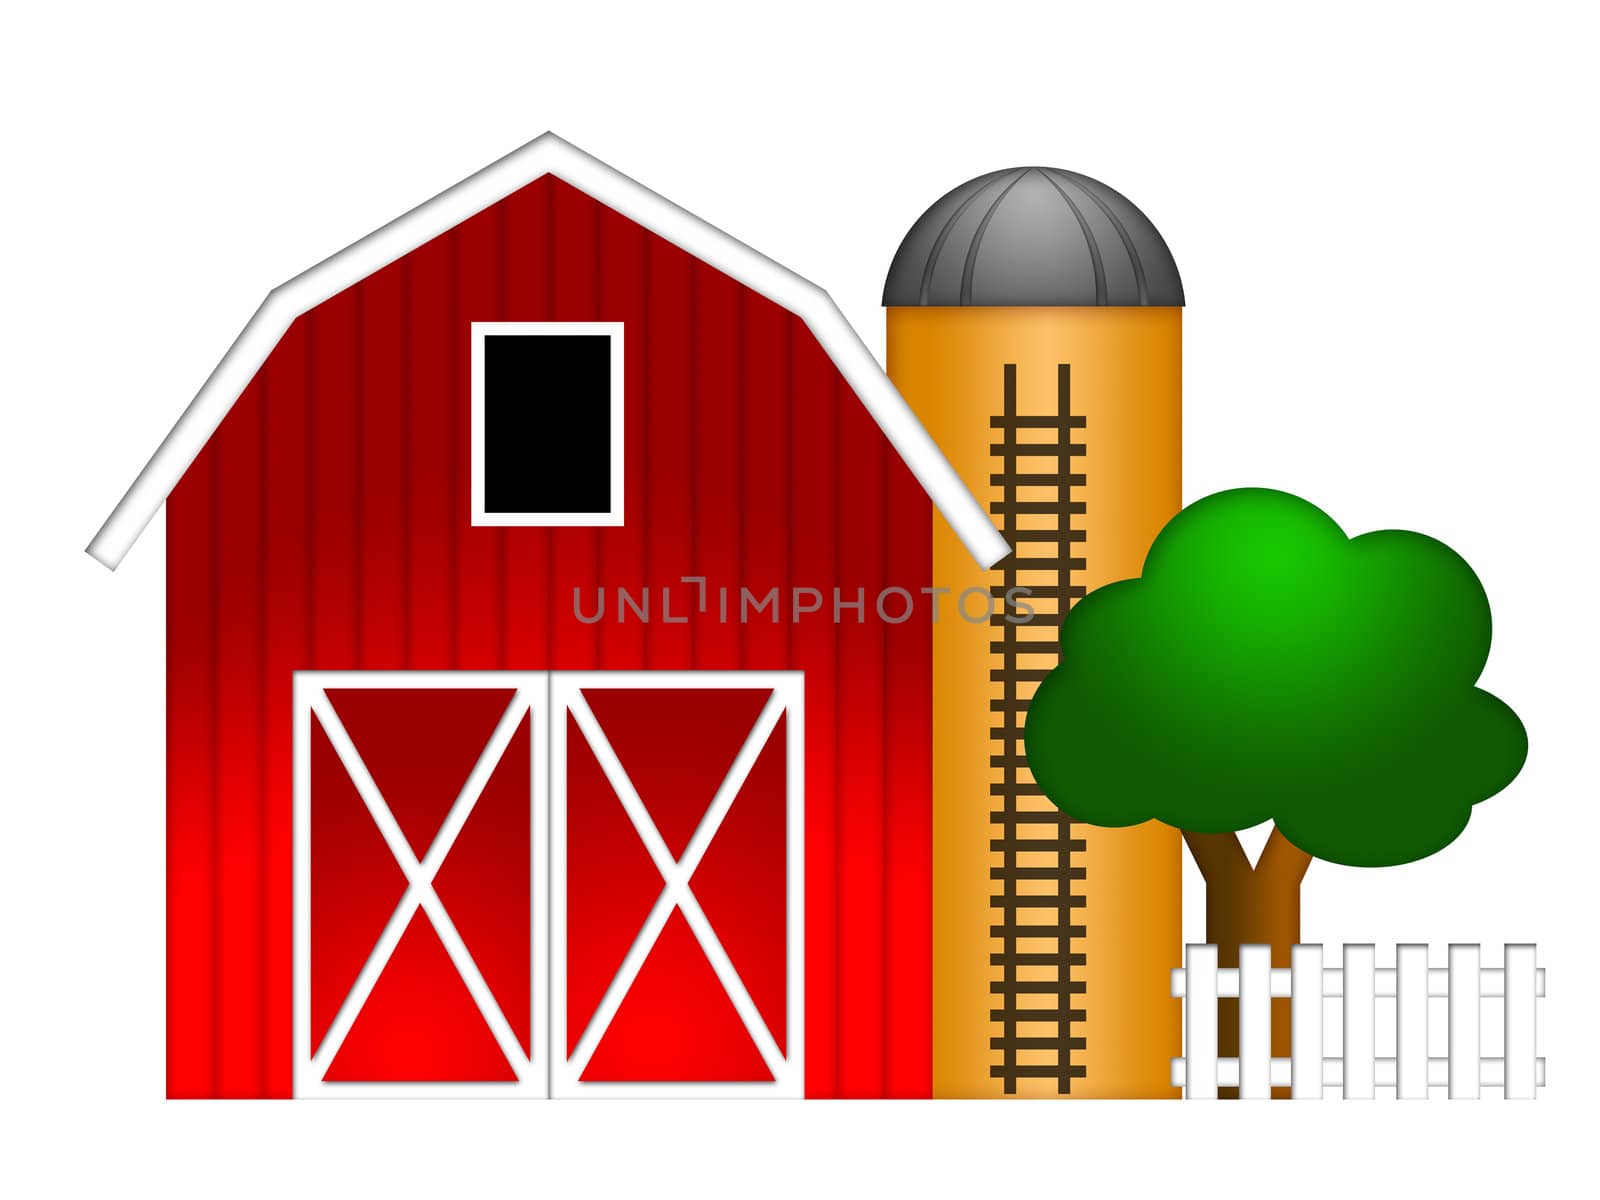 Red Barn with Grain Silo Illustration by jpldesigns